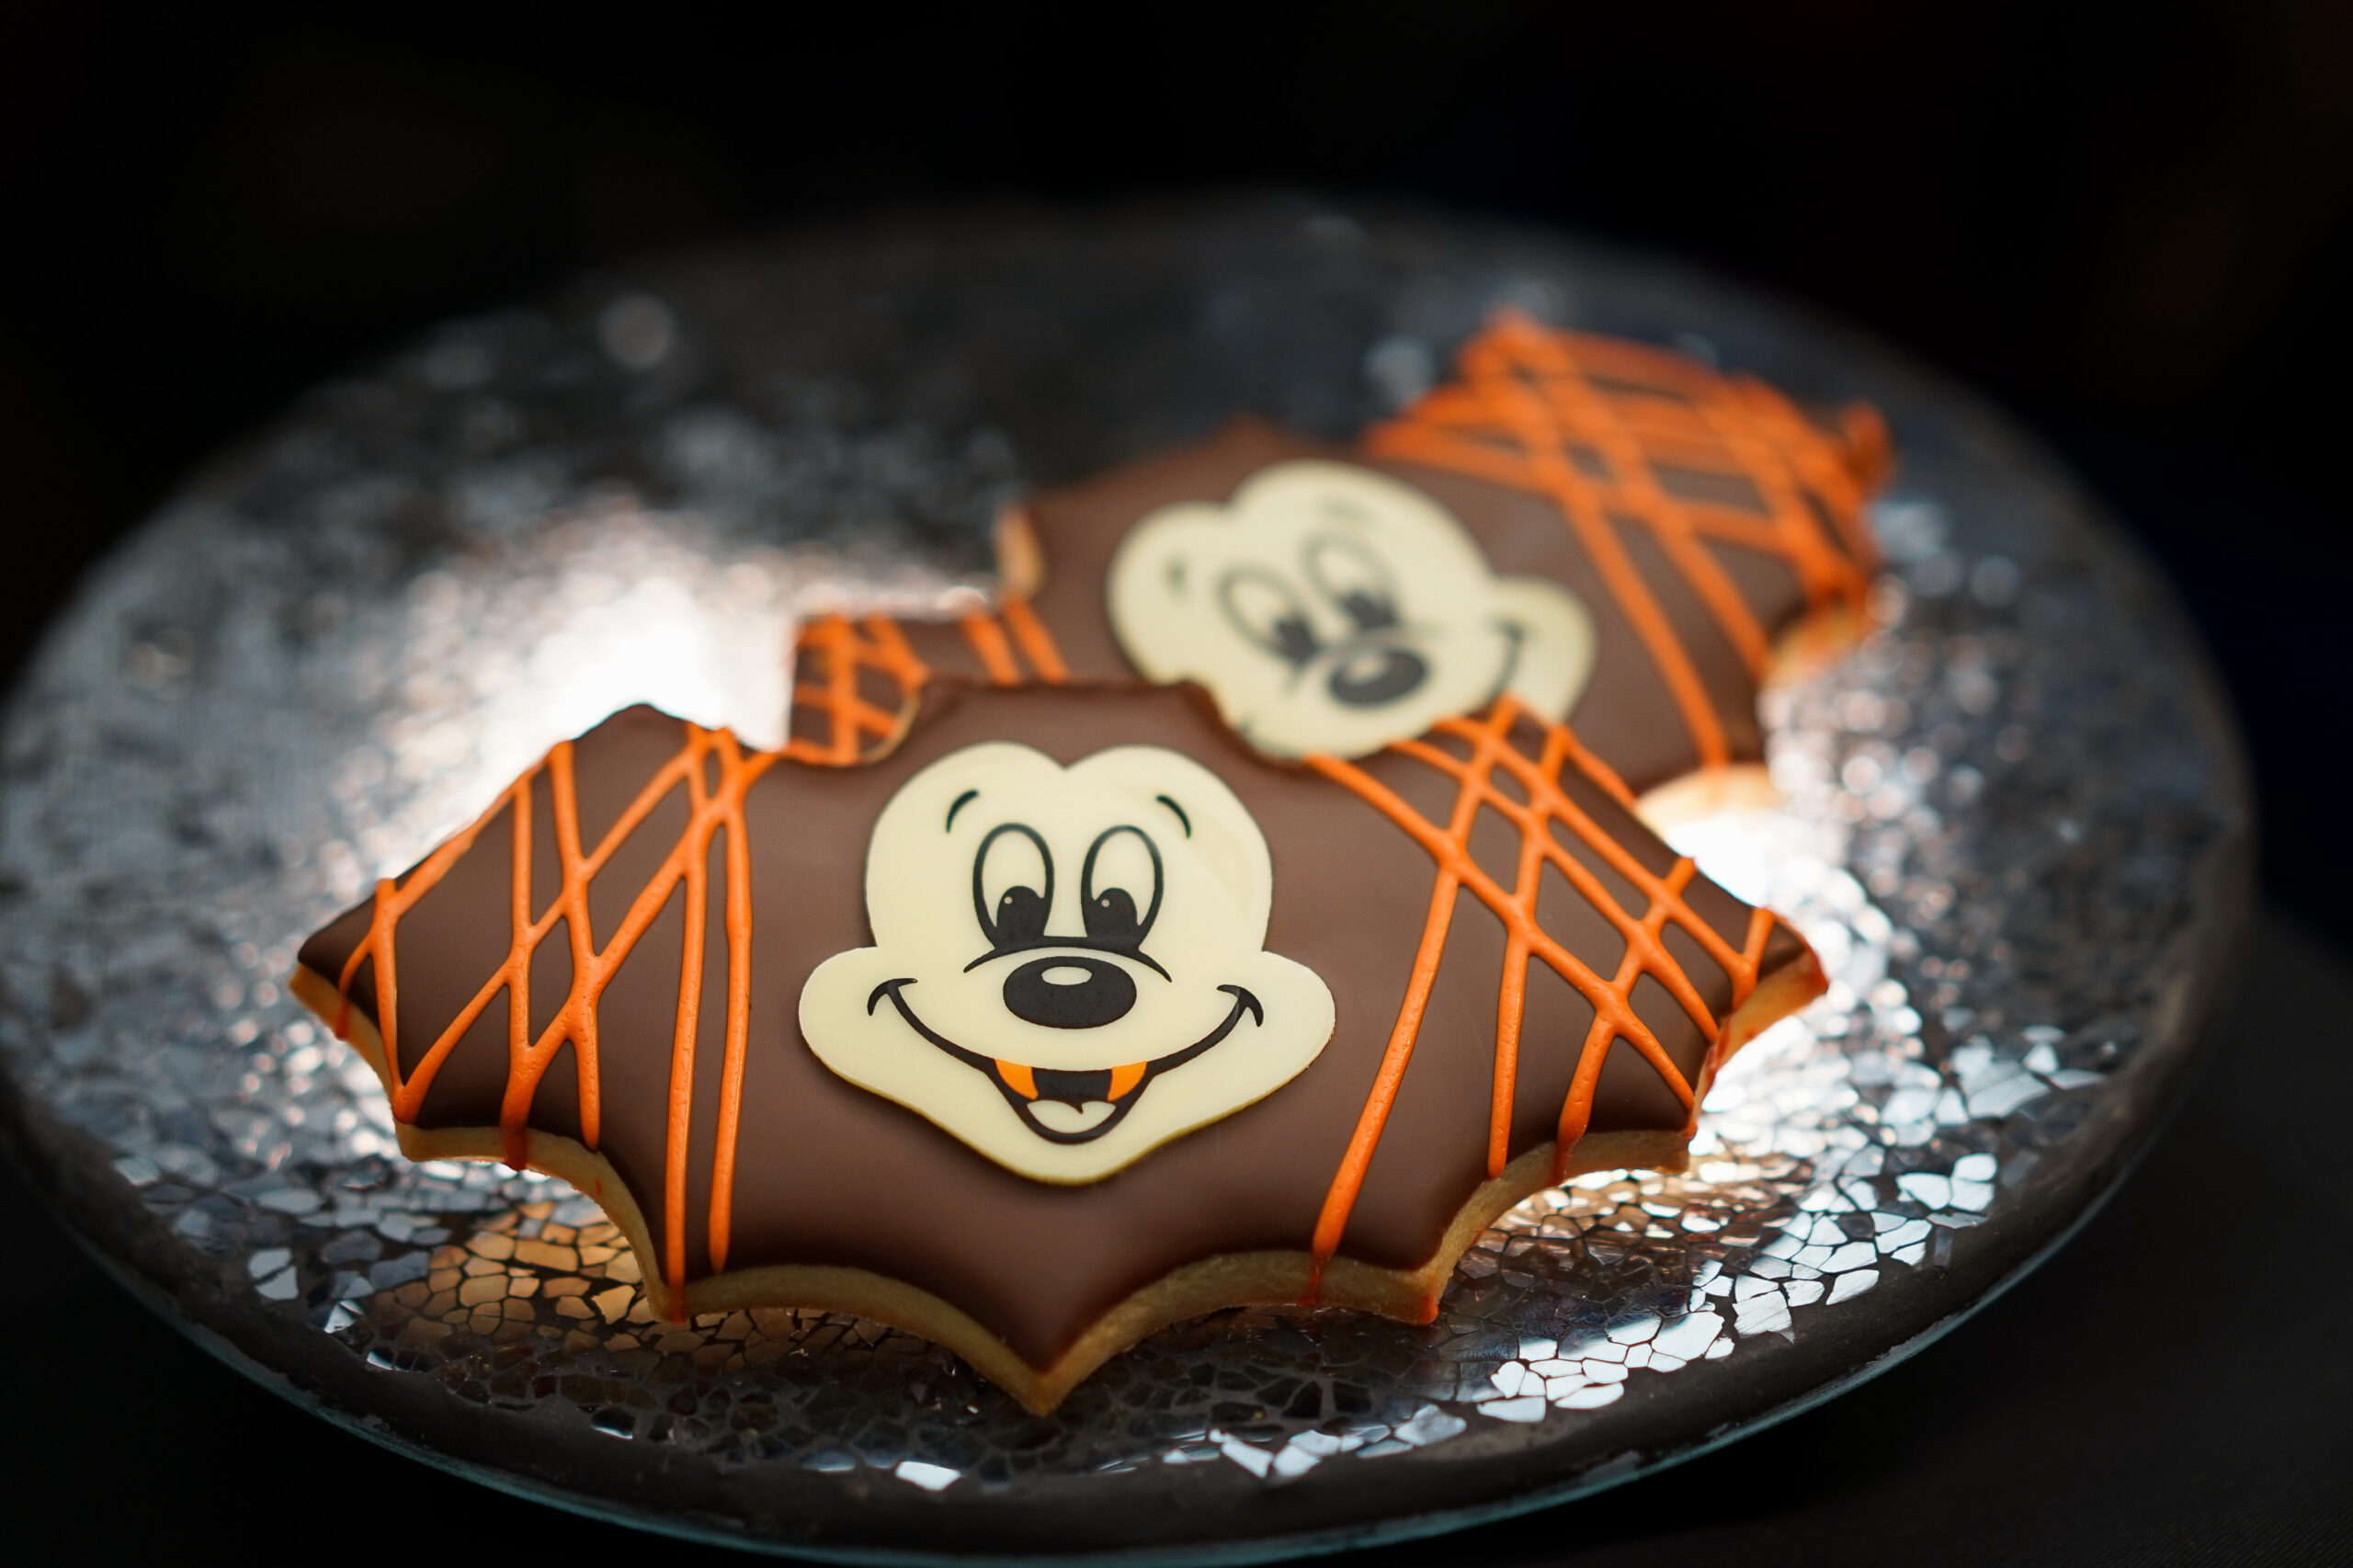 Pumpkin Mickey Mouse cake for my birthday! : r/cakedecorating